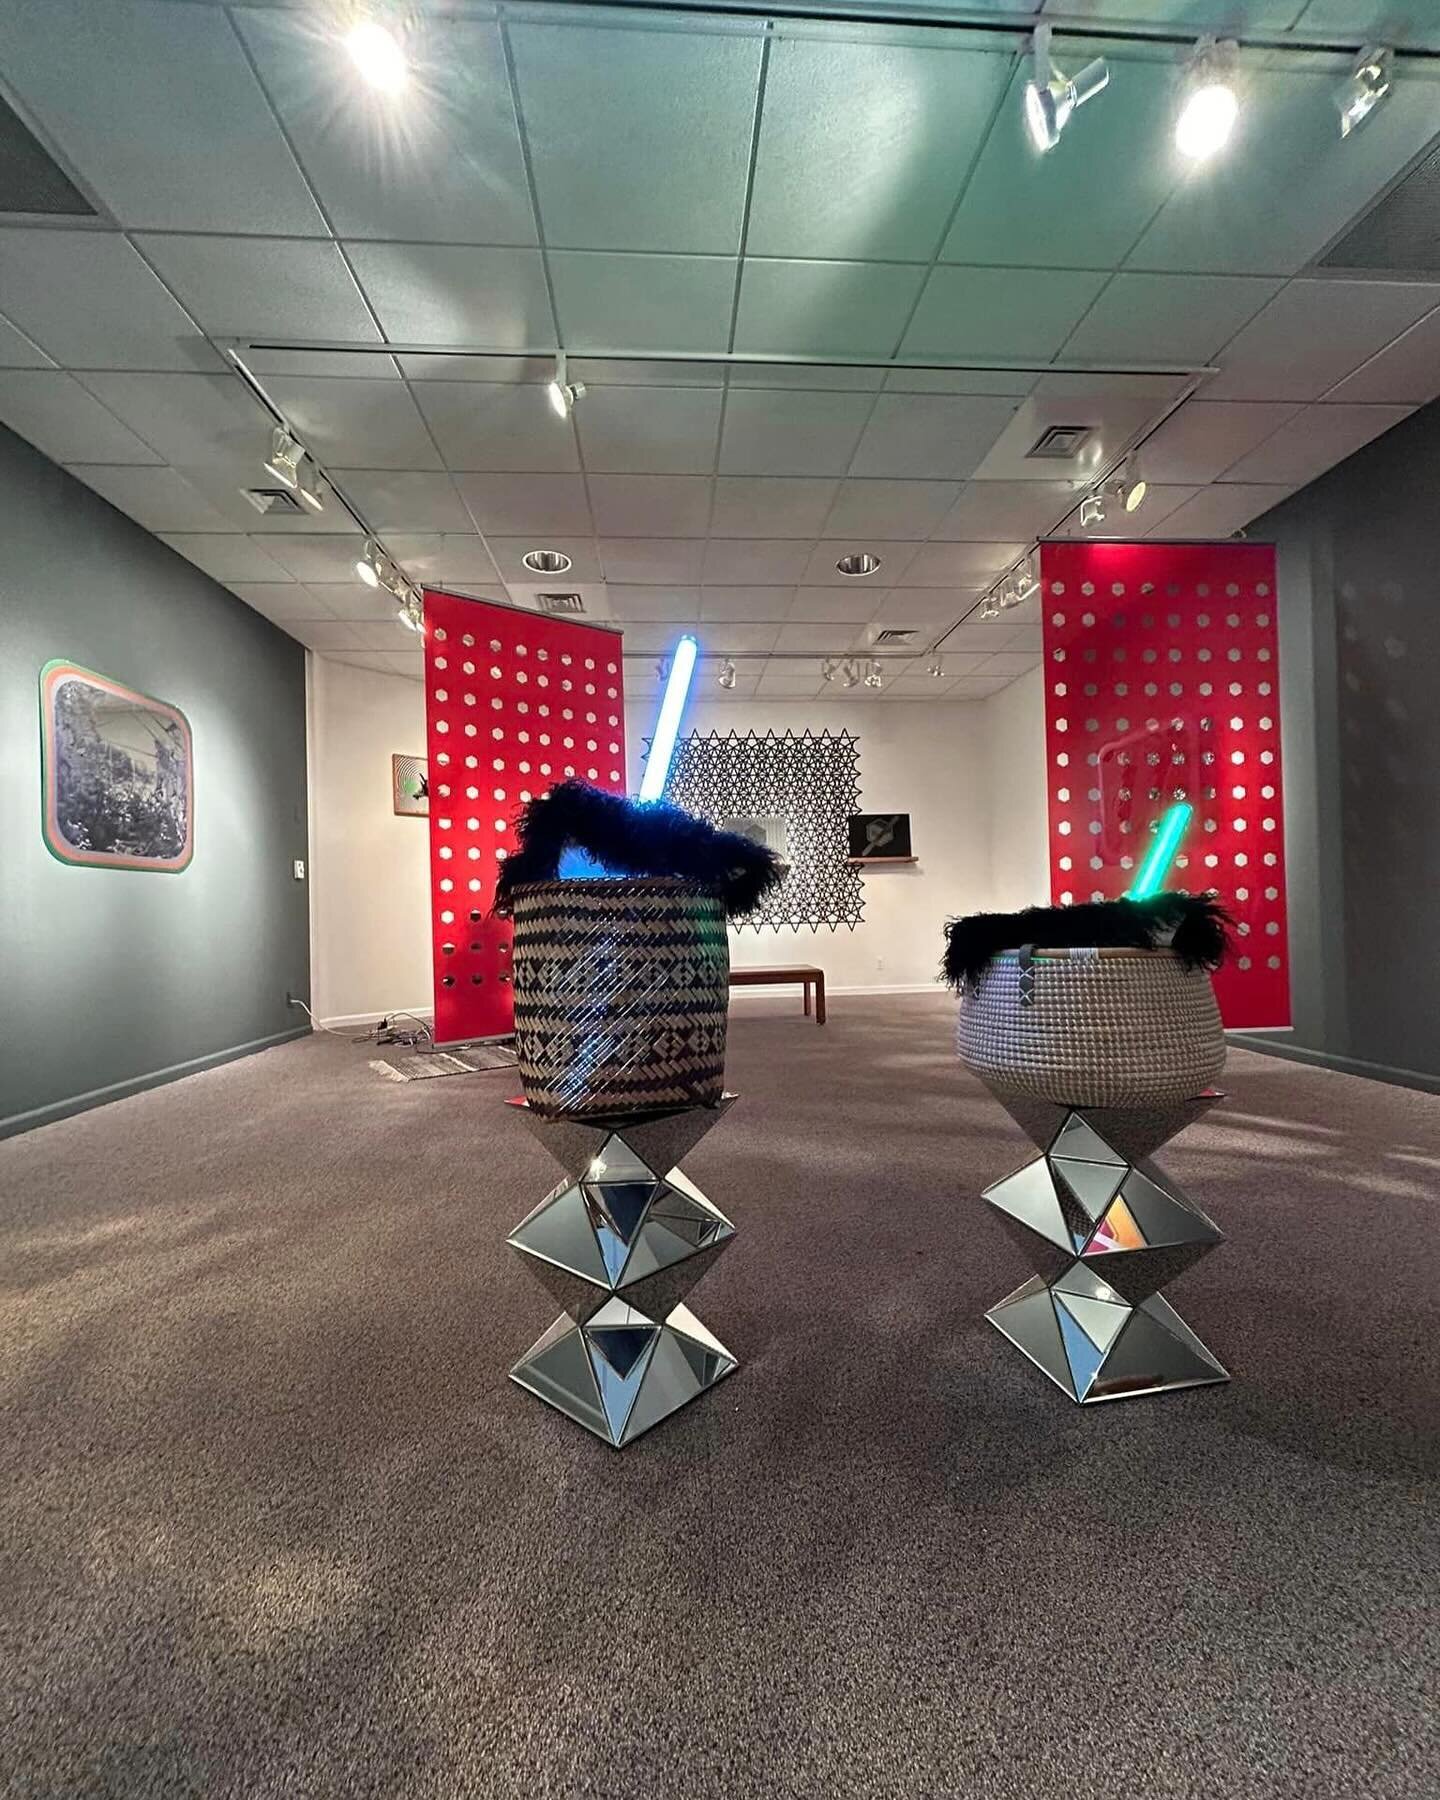 Reception for the &ldquo;Geo-Spec: Cultural Introspection Wealth&rdquo; solo exhibition will be from 4:30pm-7:30pm Thursday March 7th. Hope to see you their face to face or spiritually. (Photographer: Chris Yurko, courtesy of Holyoke Community Colleg